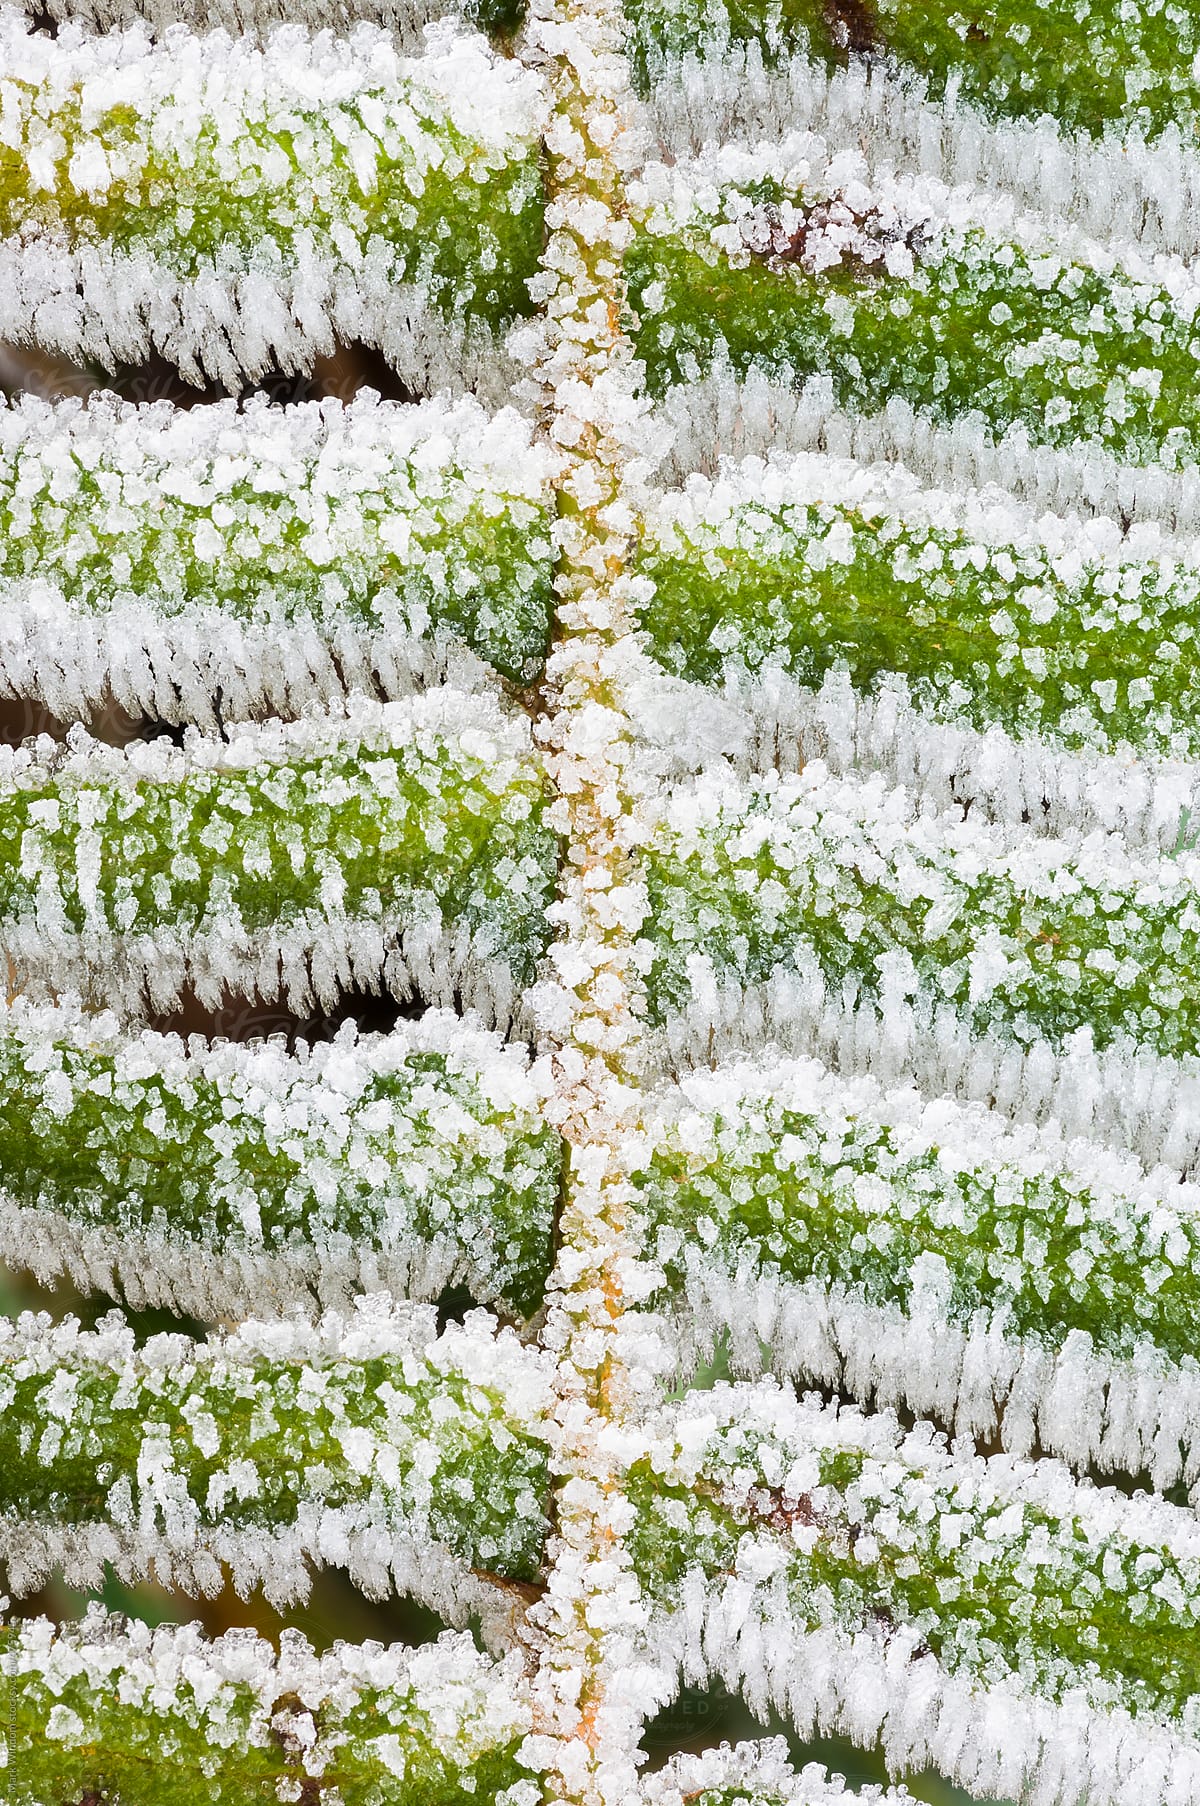 Heavy coasting of frost on a fern frond, closeup